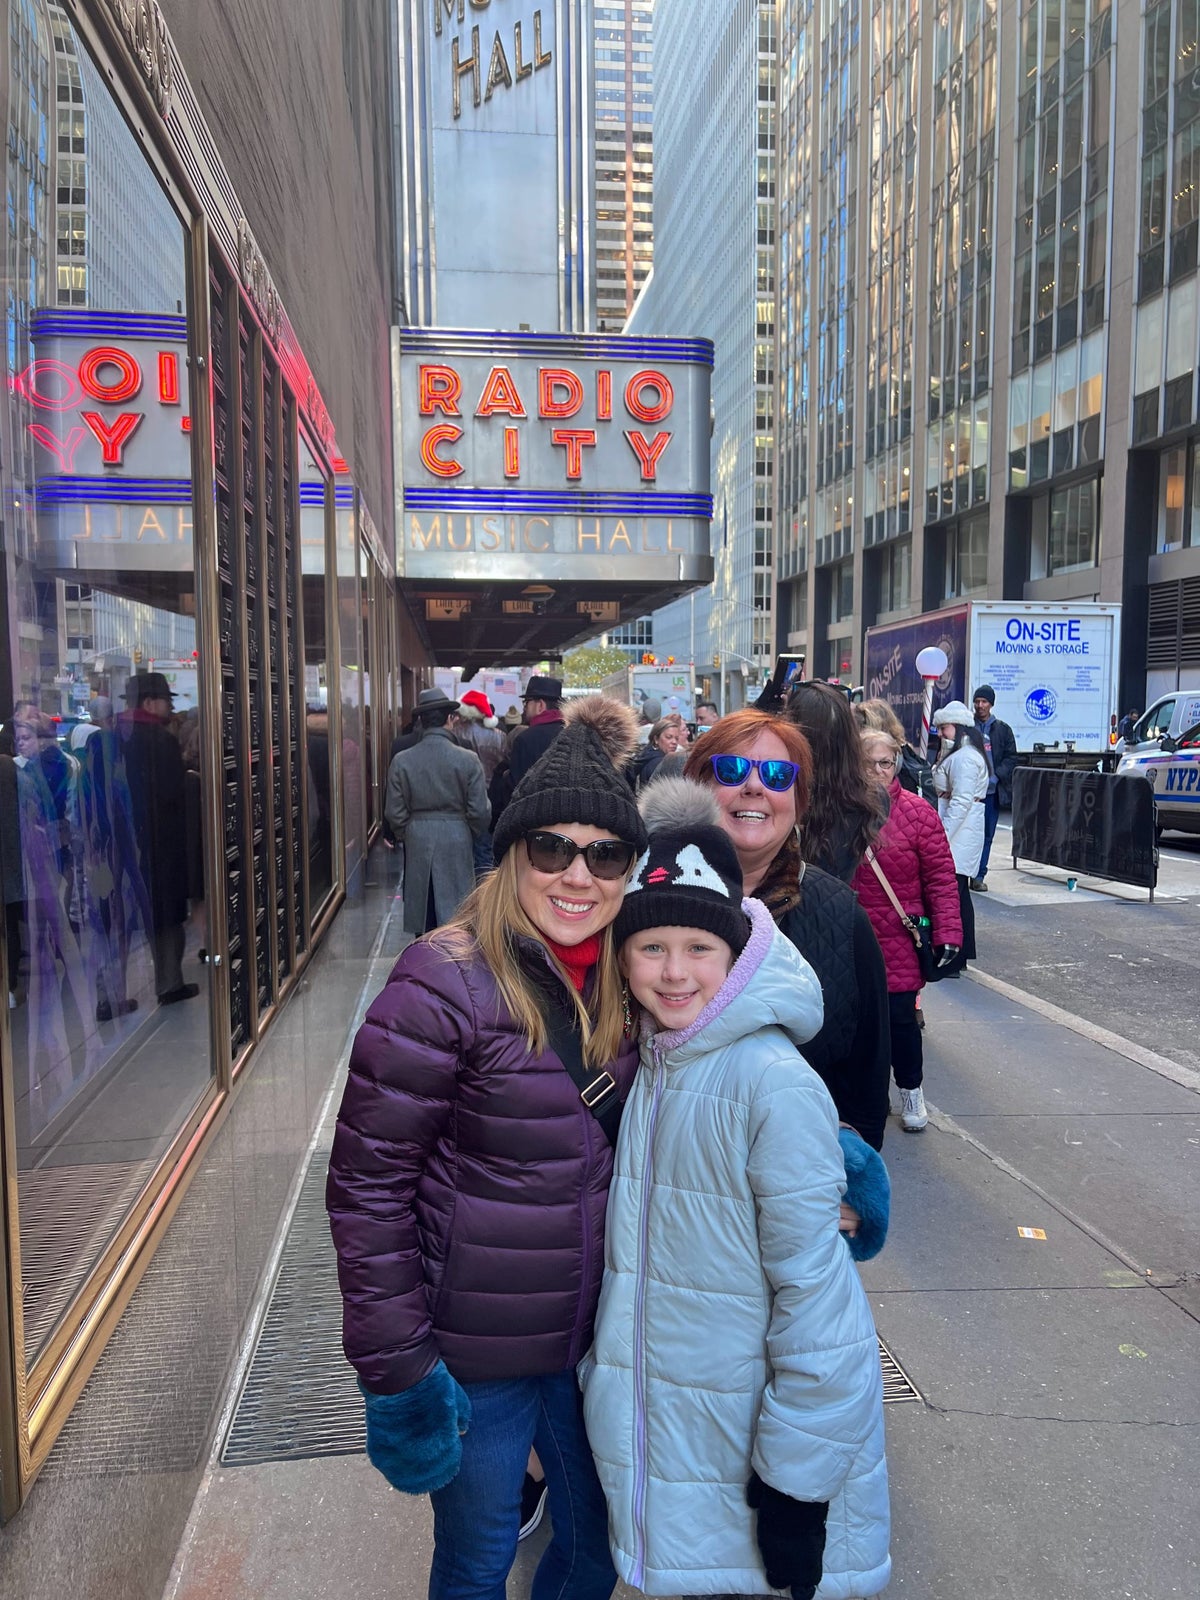 Standing outside of Radio City Music Hall in New York City